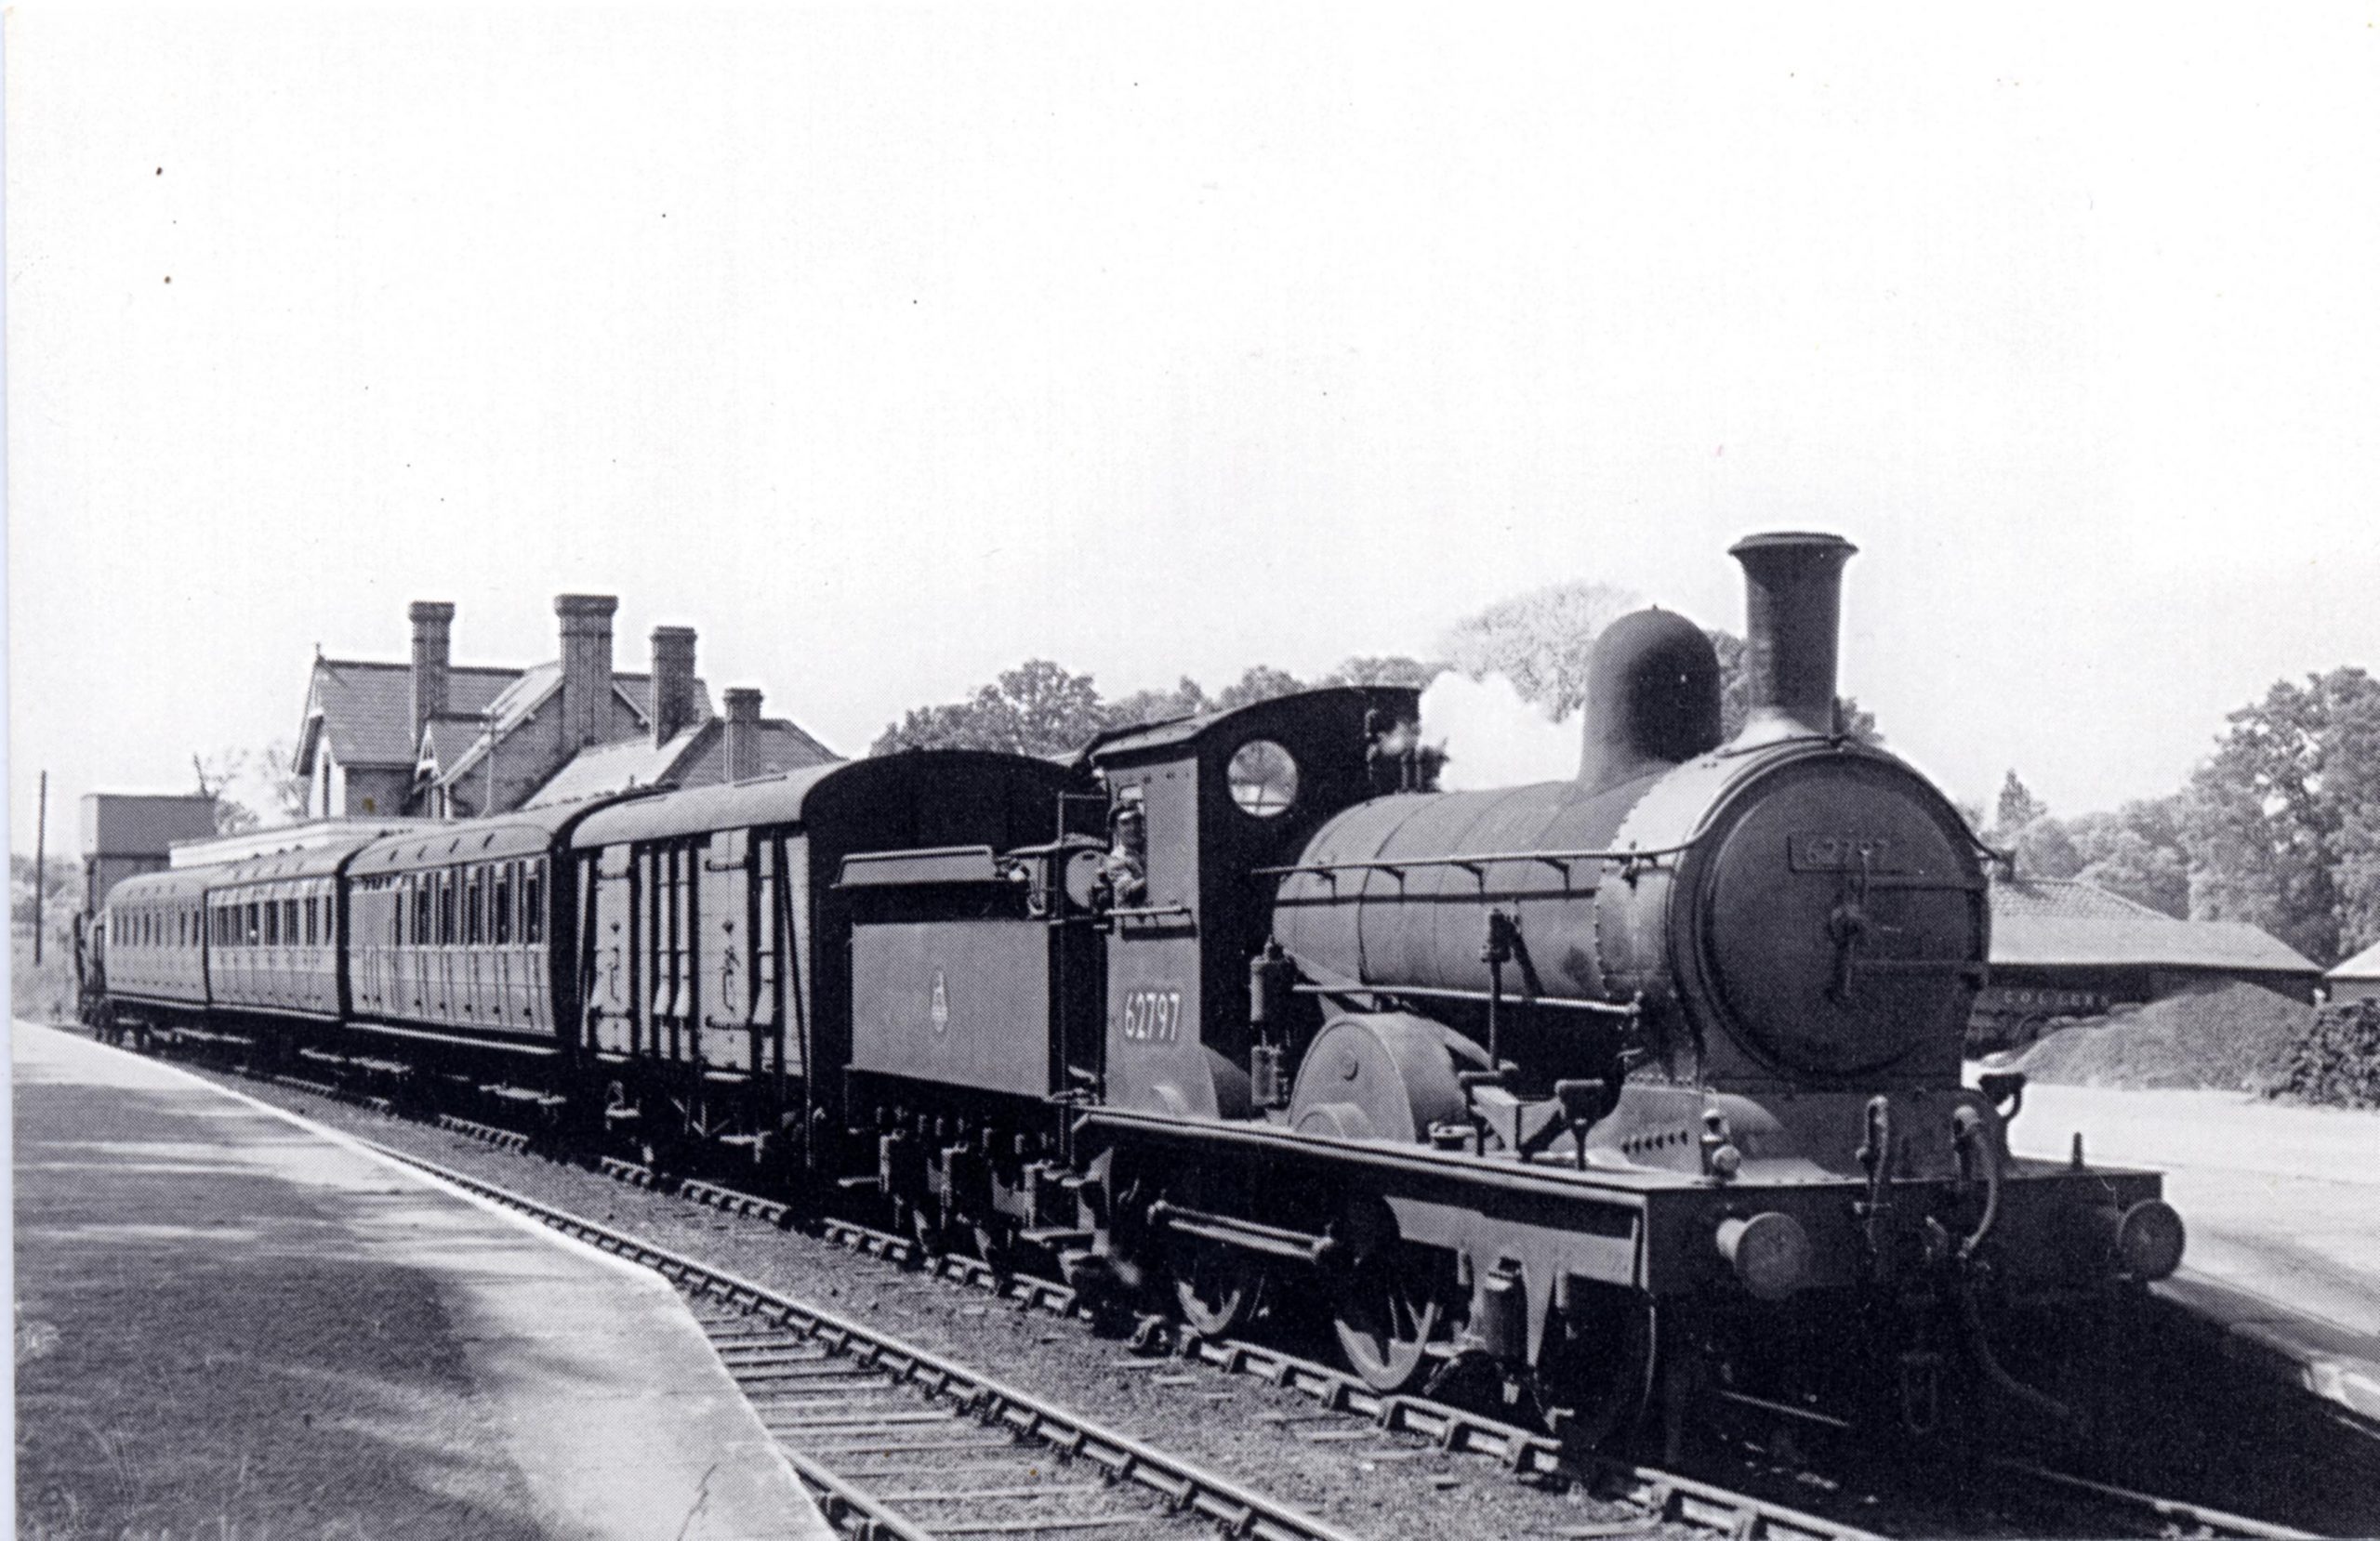 B1-2-14 - image from Town Archive